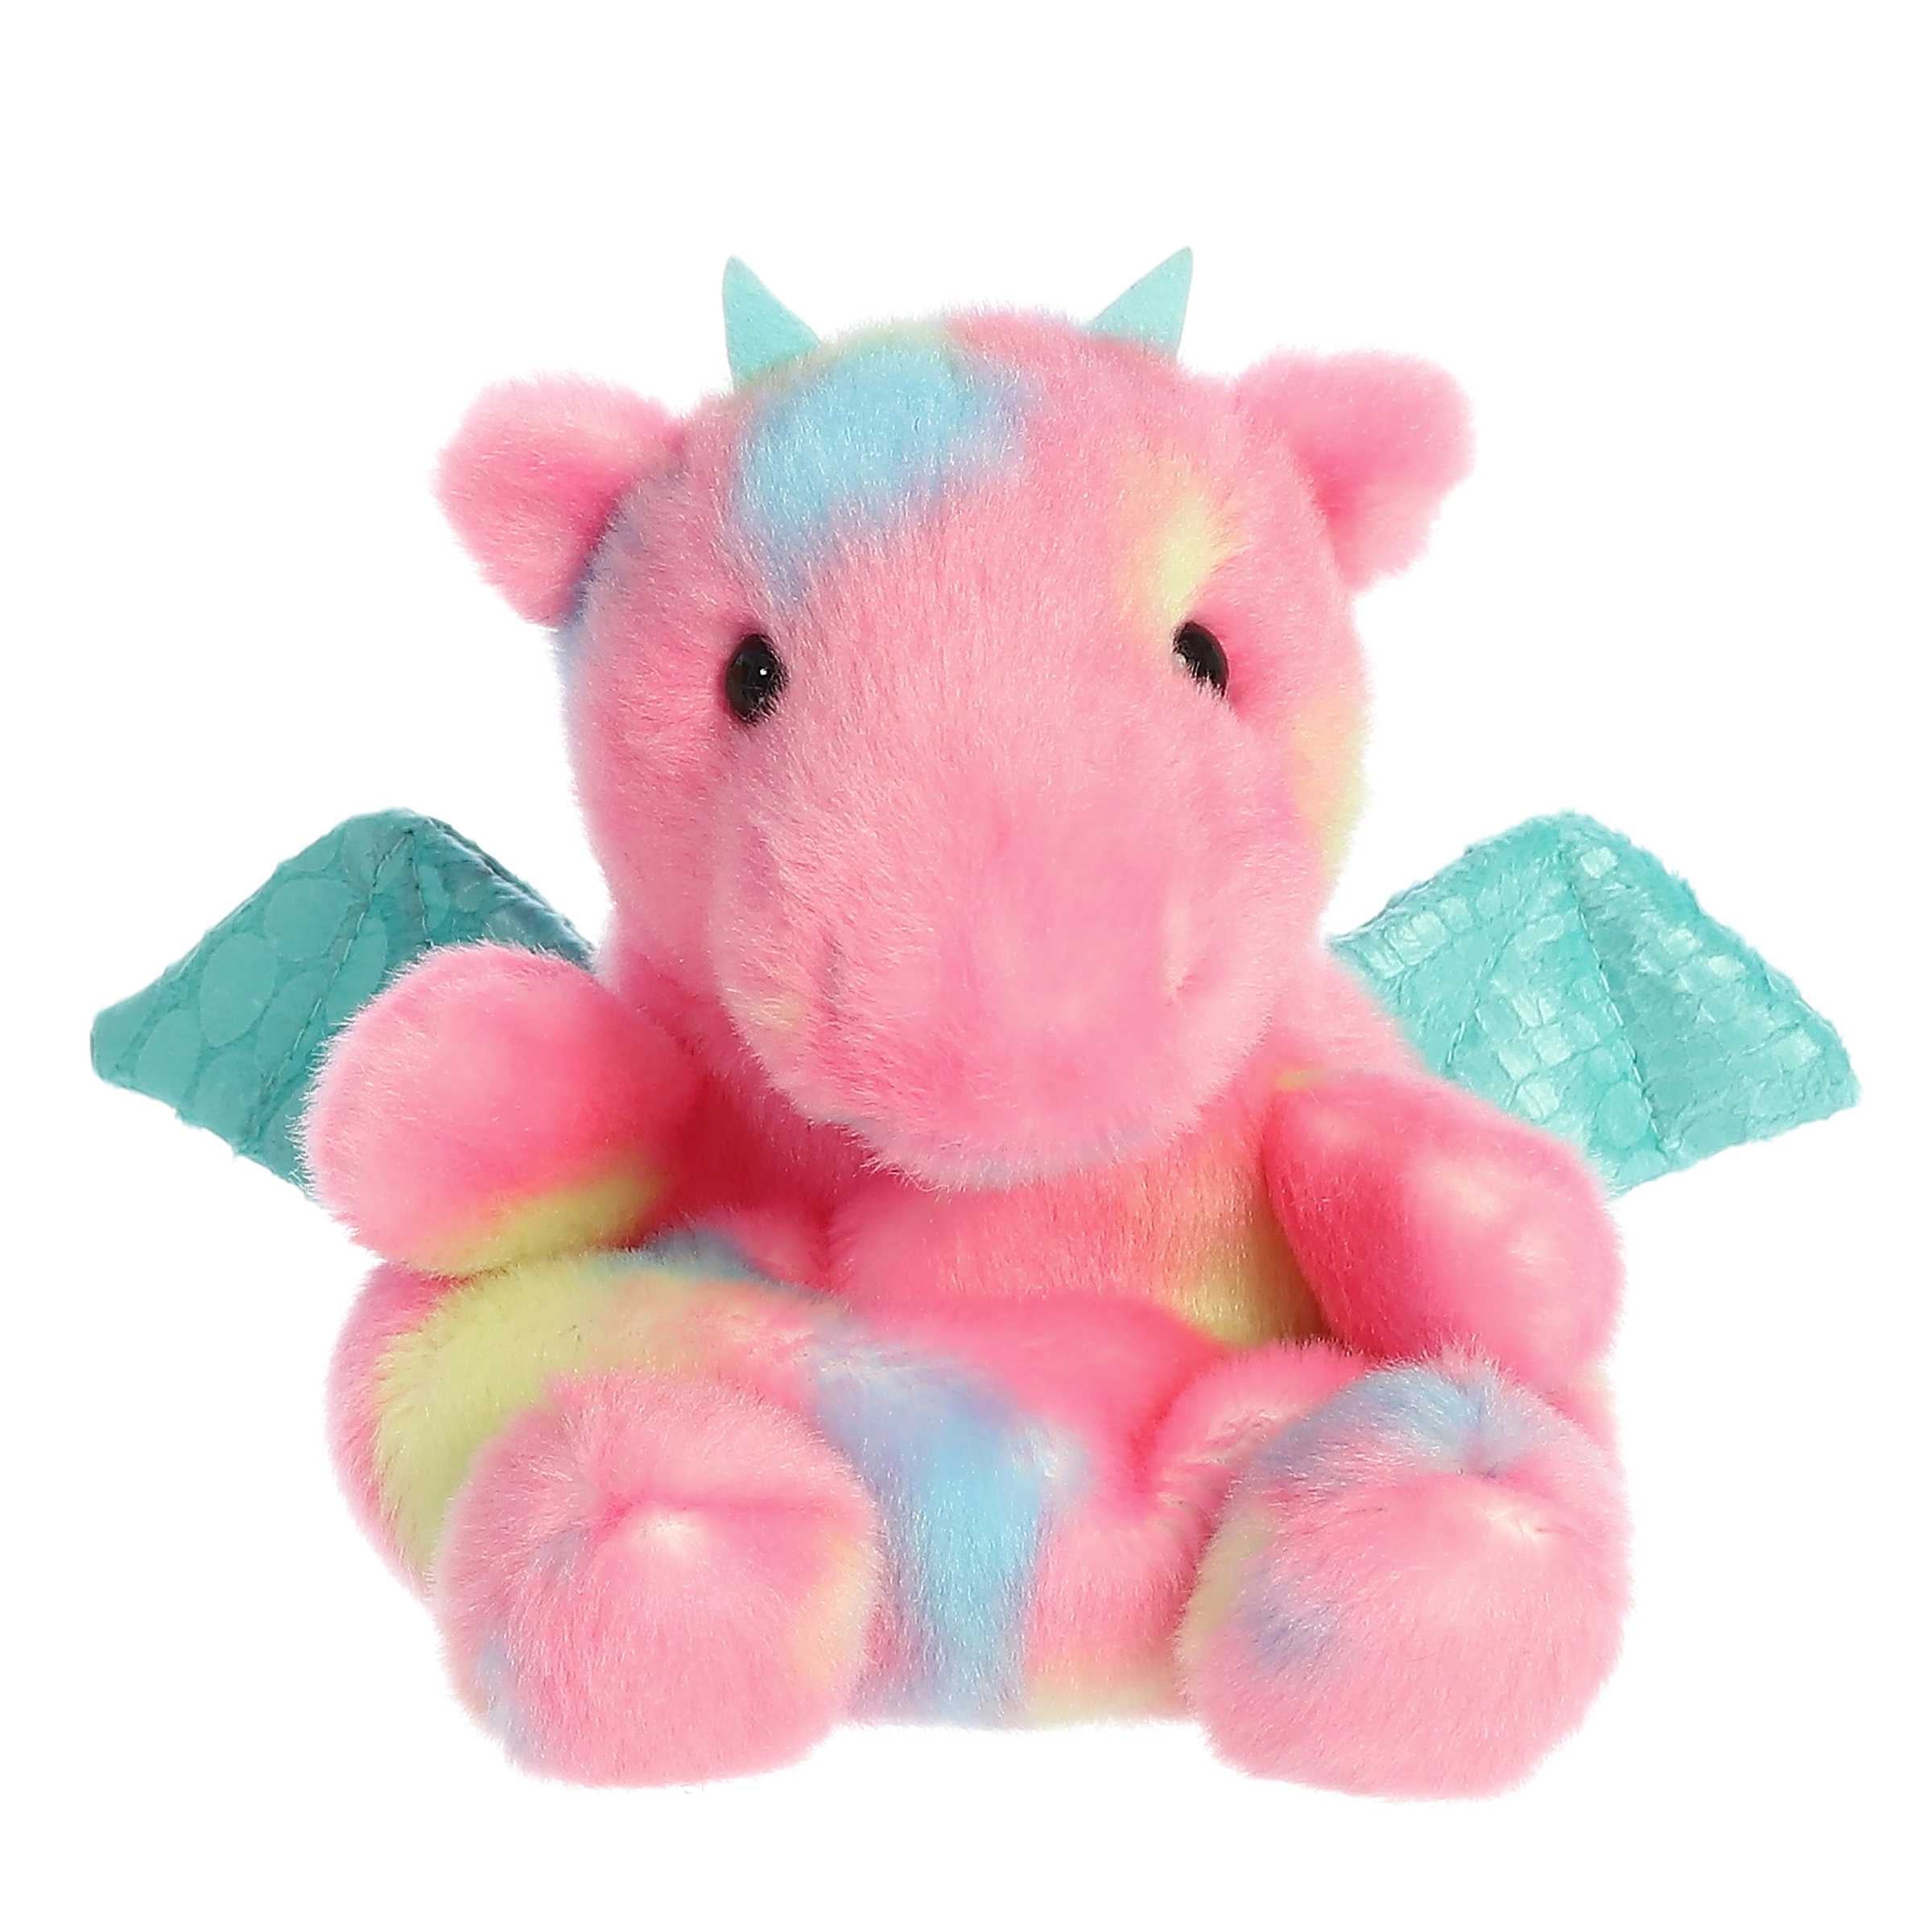 Anya Dragon plush is a vision of plush enchantment with her pastel pink and rainbow hues, with teal wings